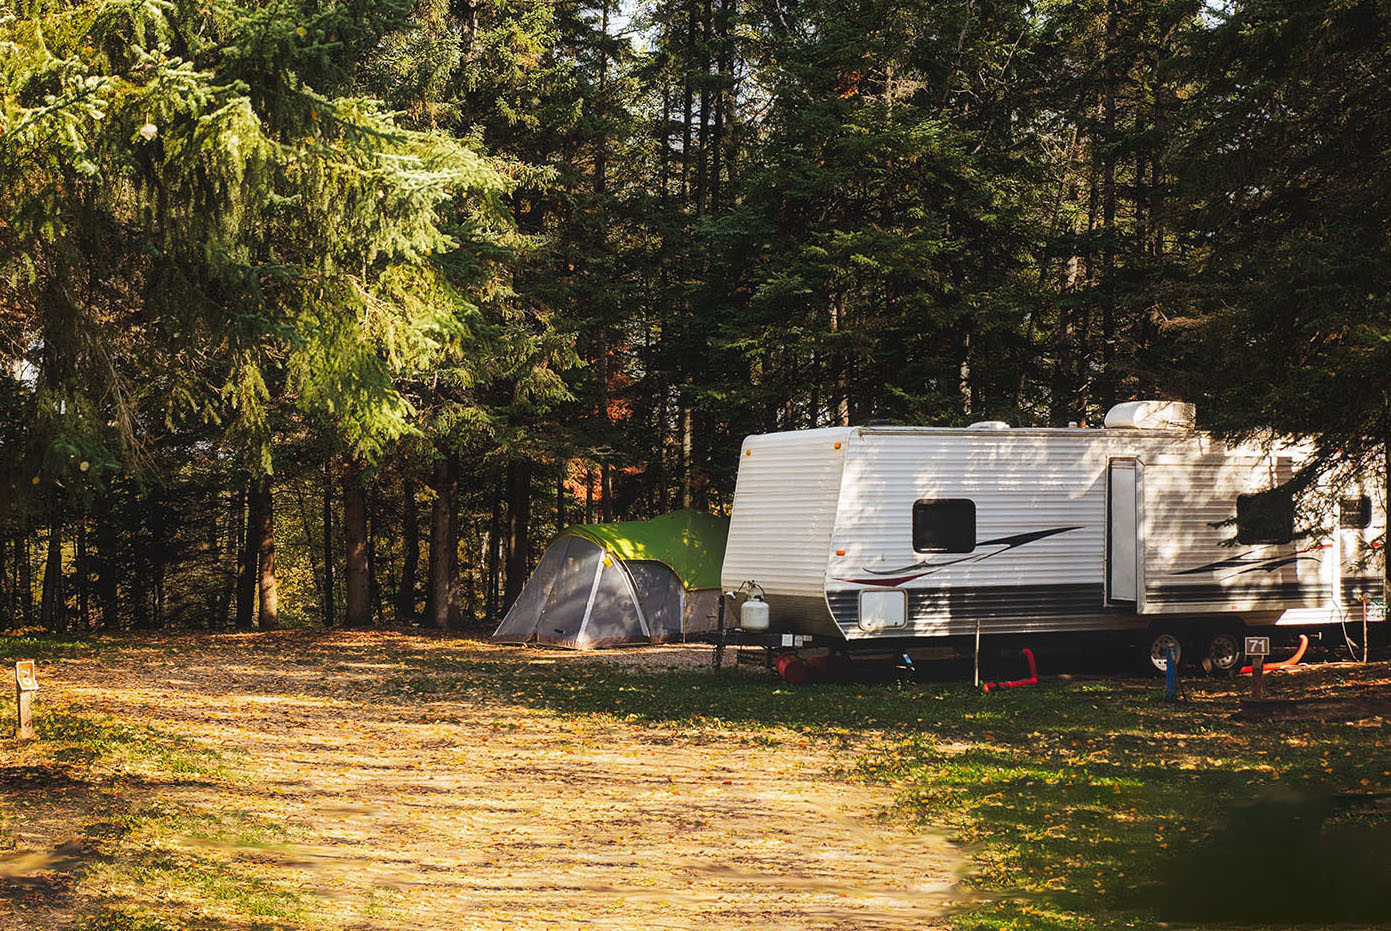 Travel trailer camped out in the woods.